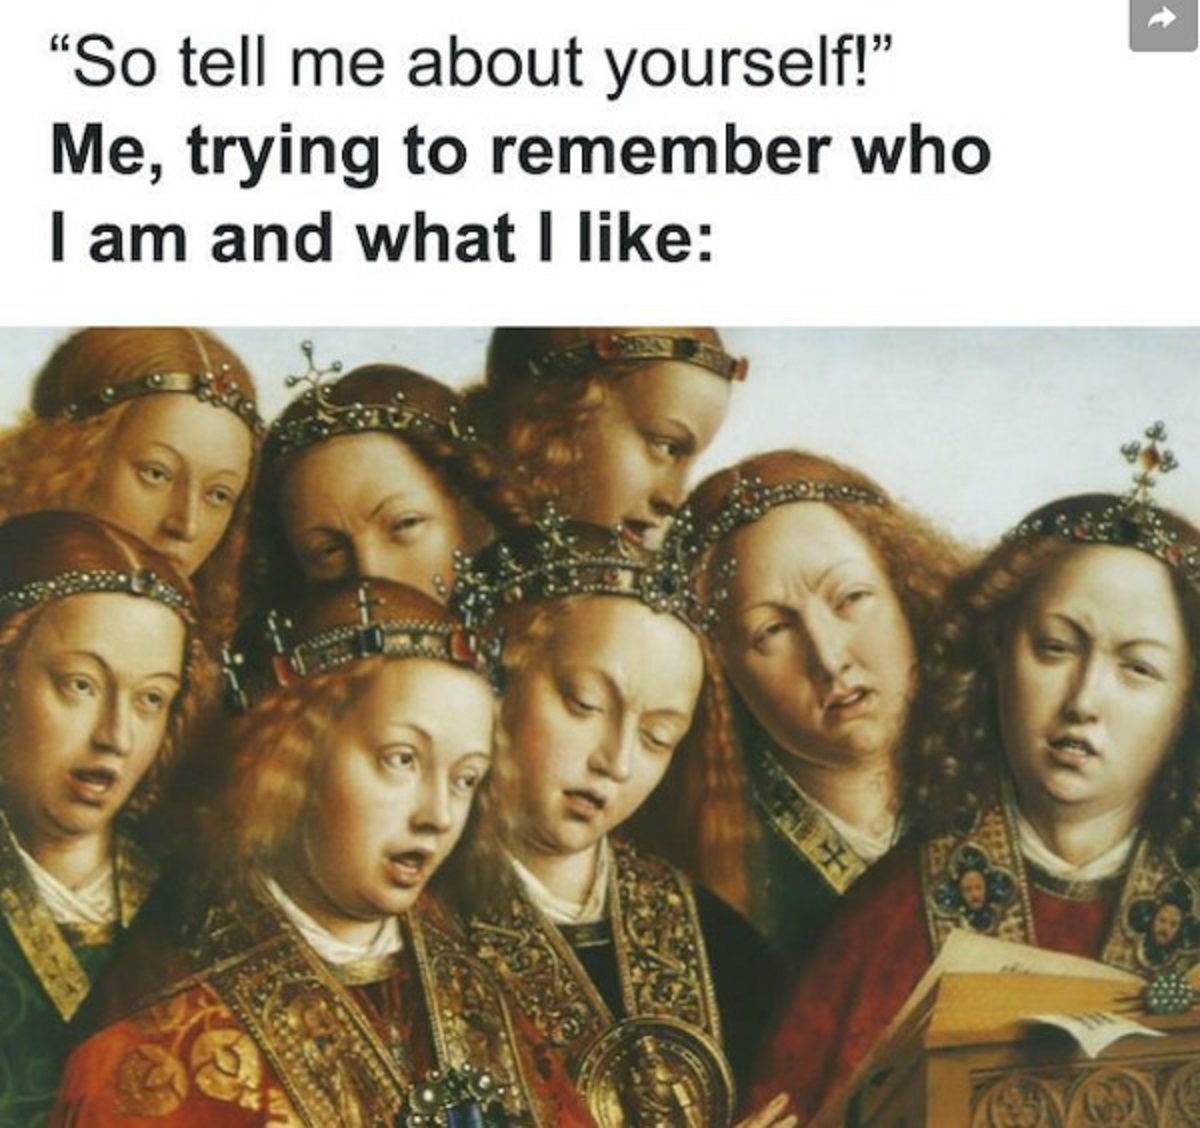 ghent altarpiece choir - "So tell me about yourself!" Me, trying to remember who I am and what I H